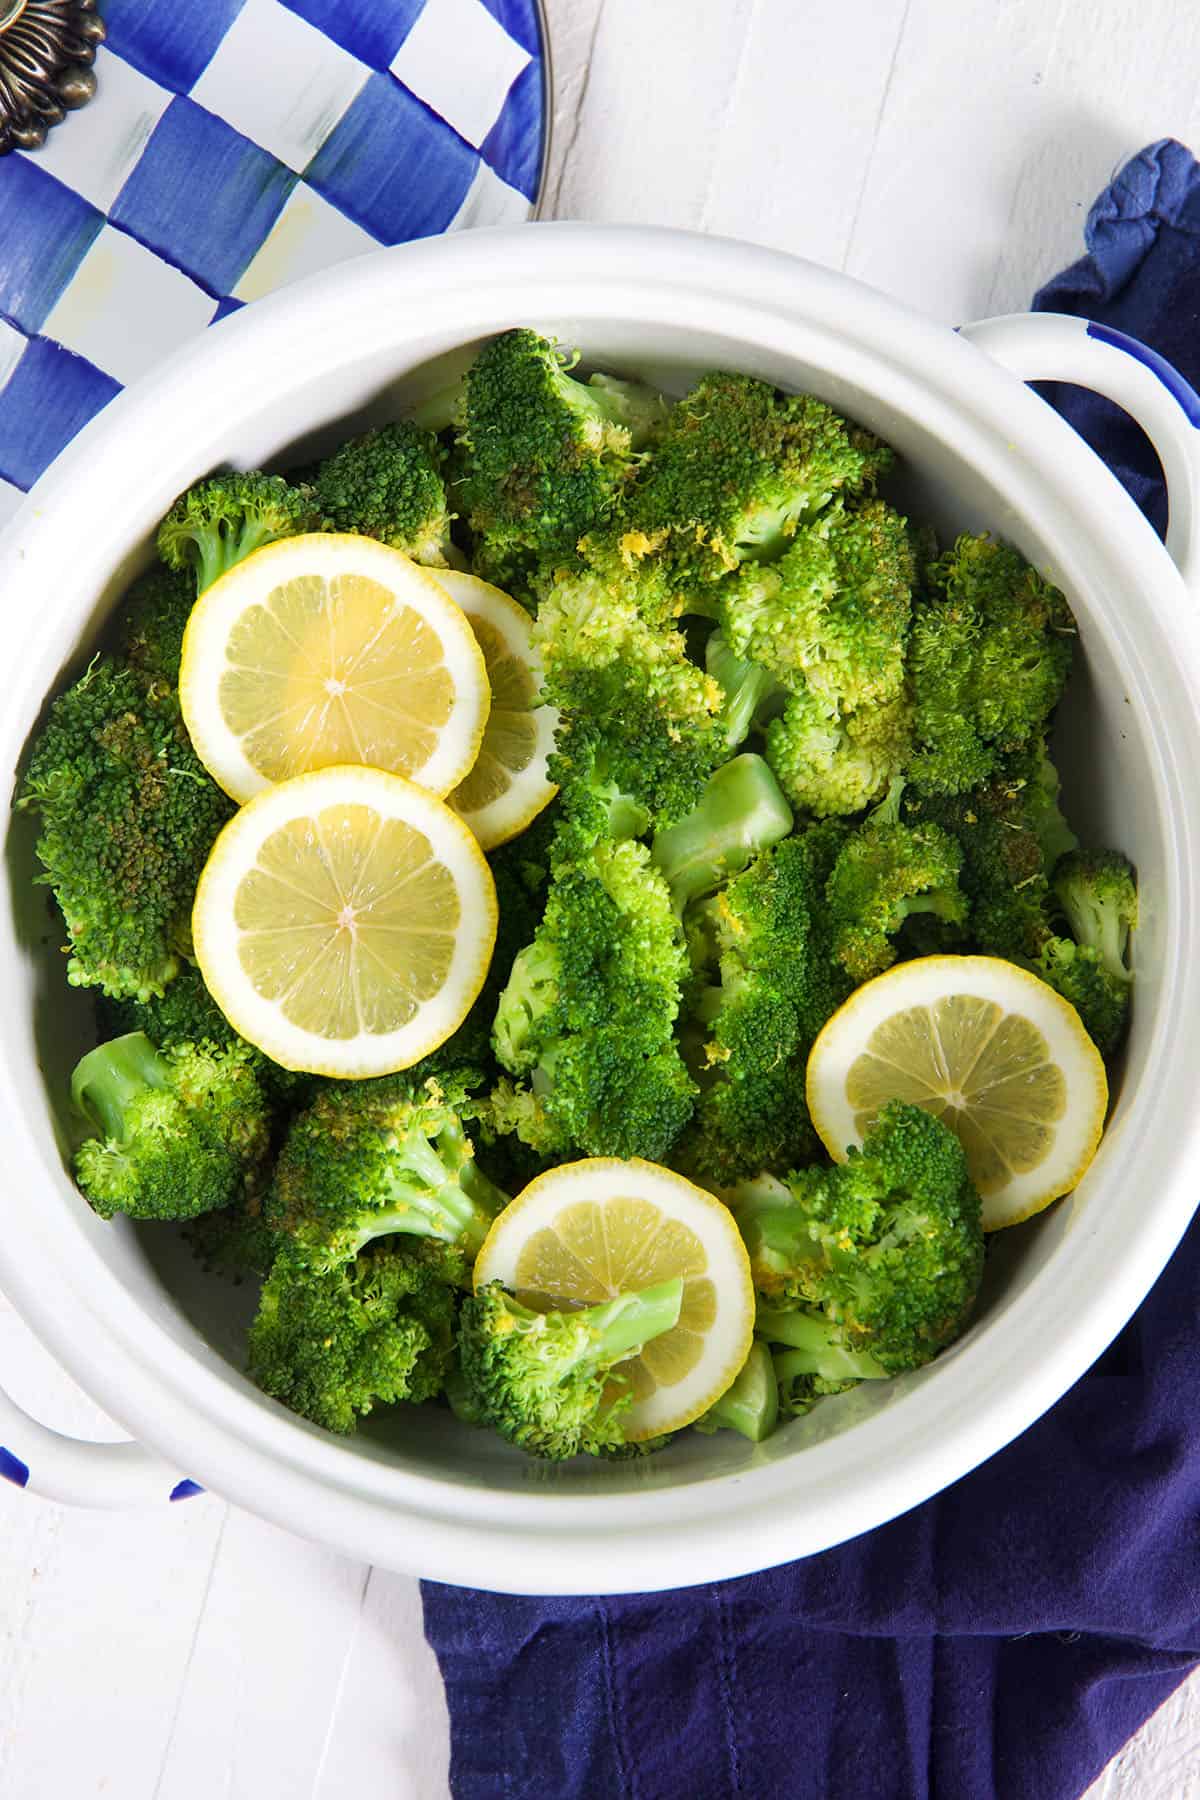 A white pot is filled with steamed broccoli and lemon slices.